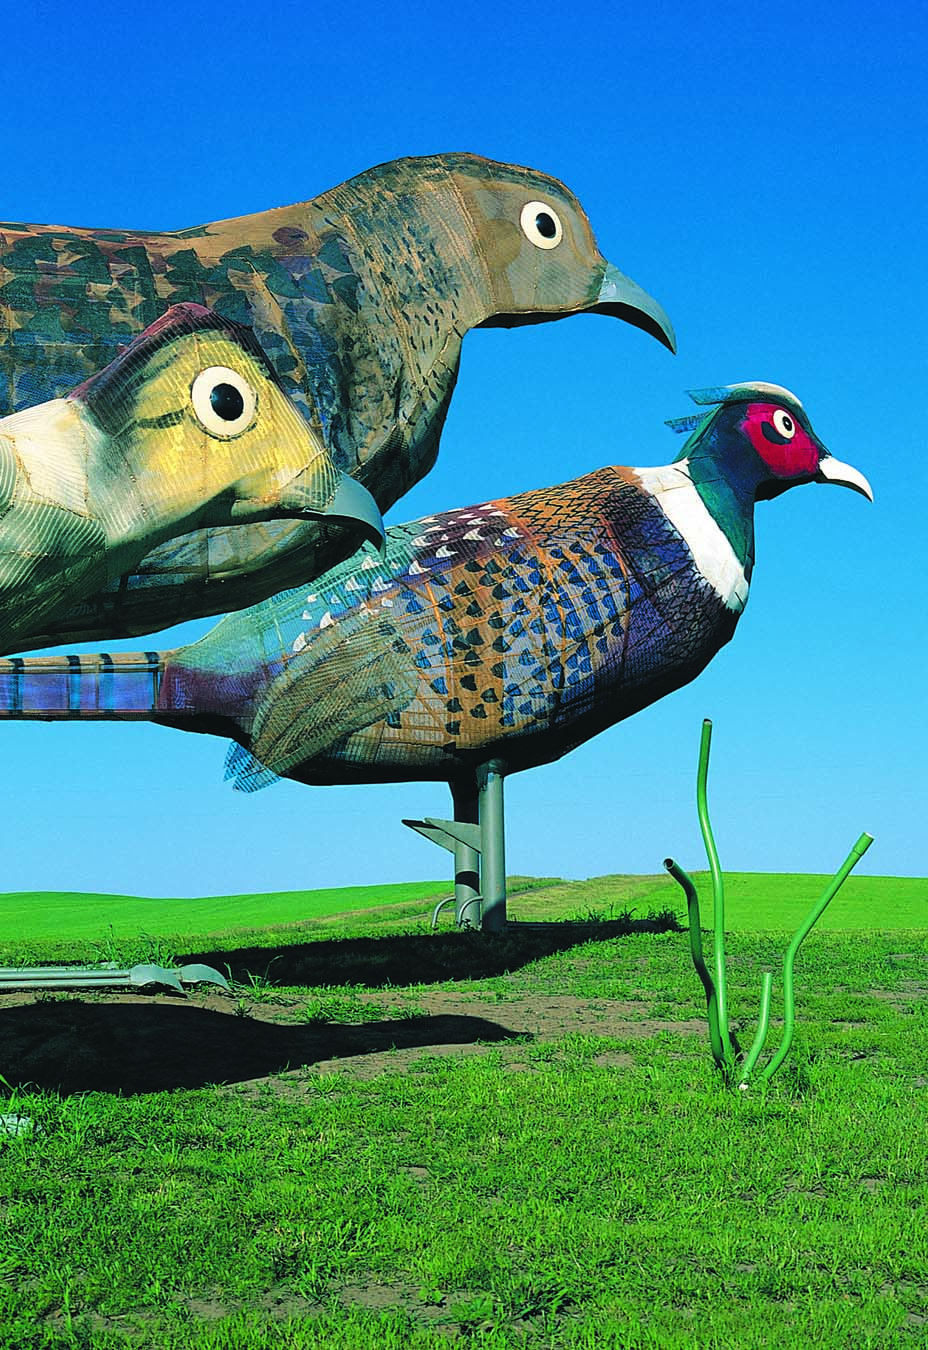 The Enchanted Highway